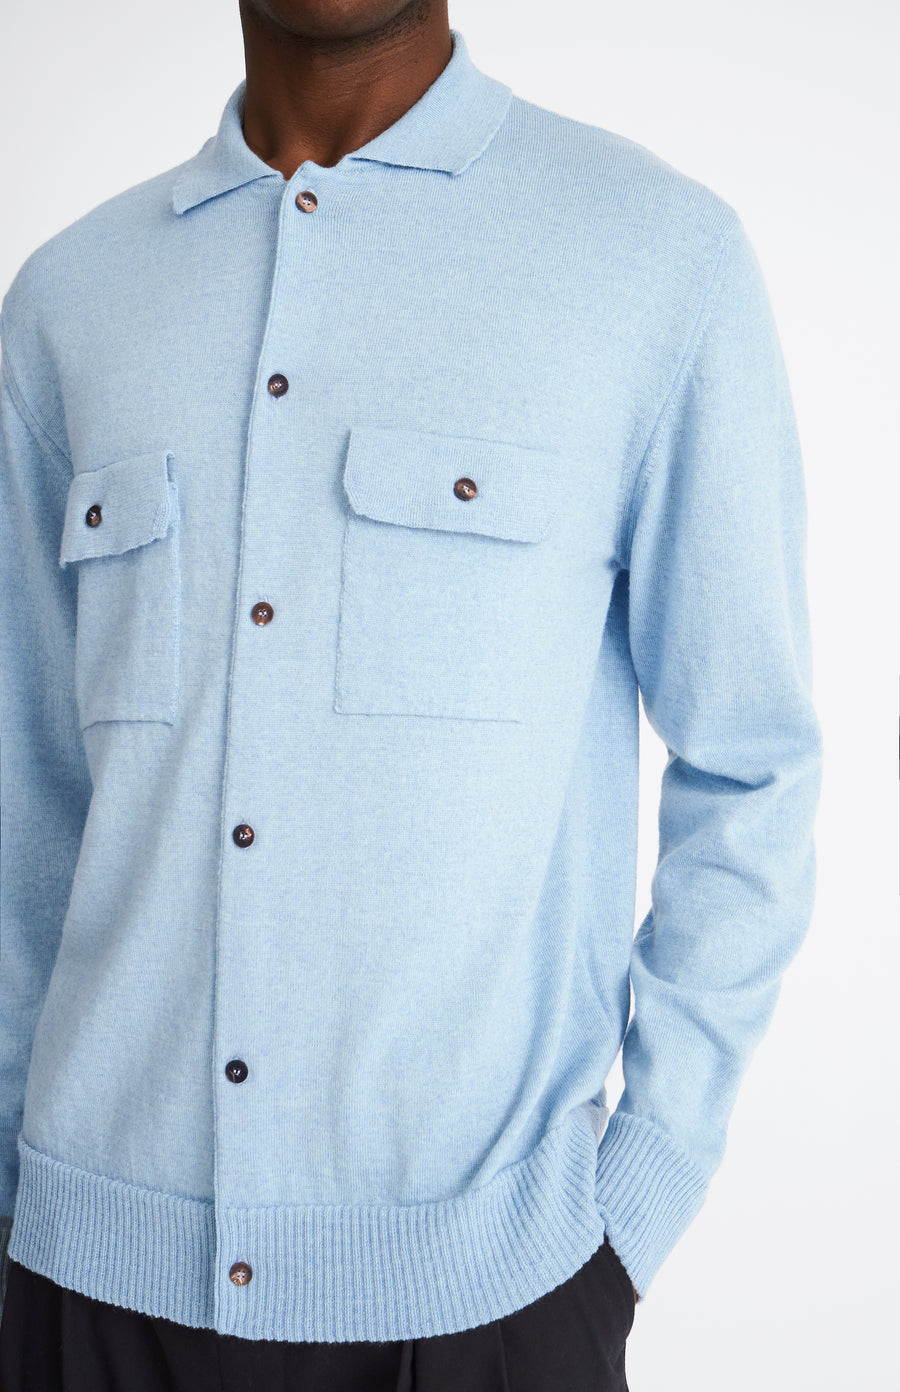 Pringle of Scotland Fine Merino Knitted Overshirt in Blue Smoke showing button and pocket detail